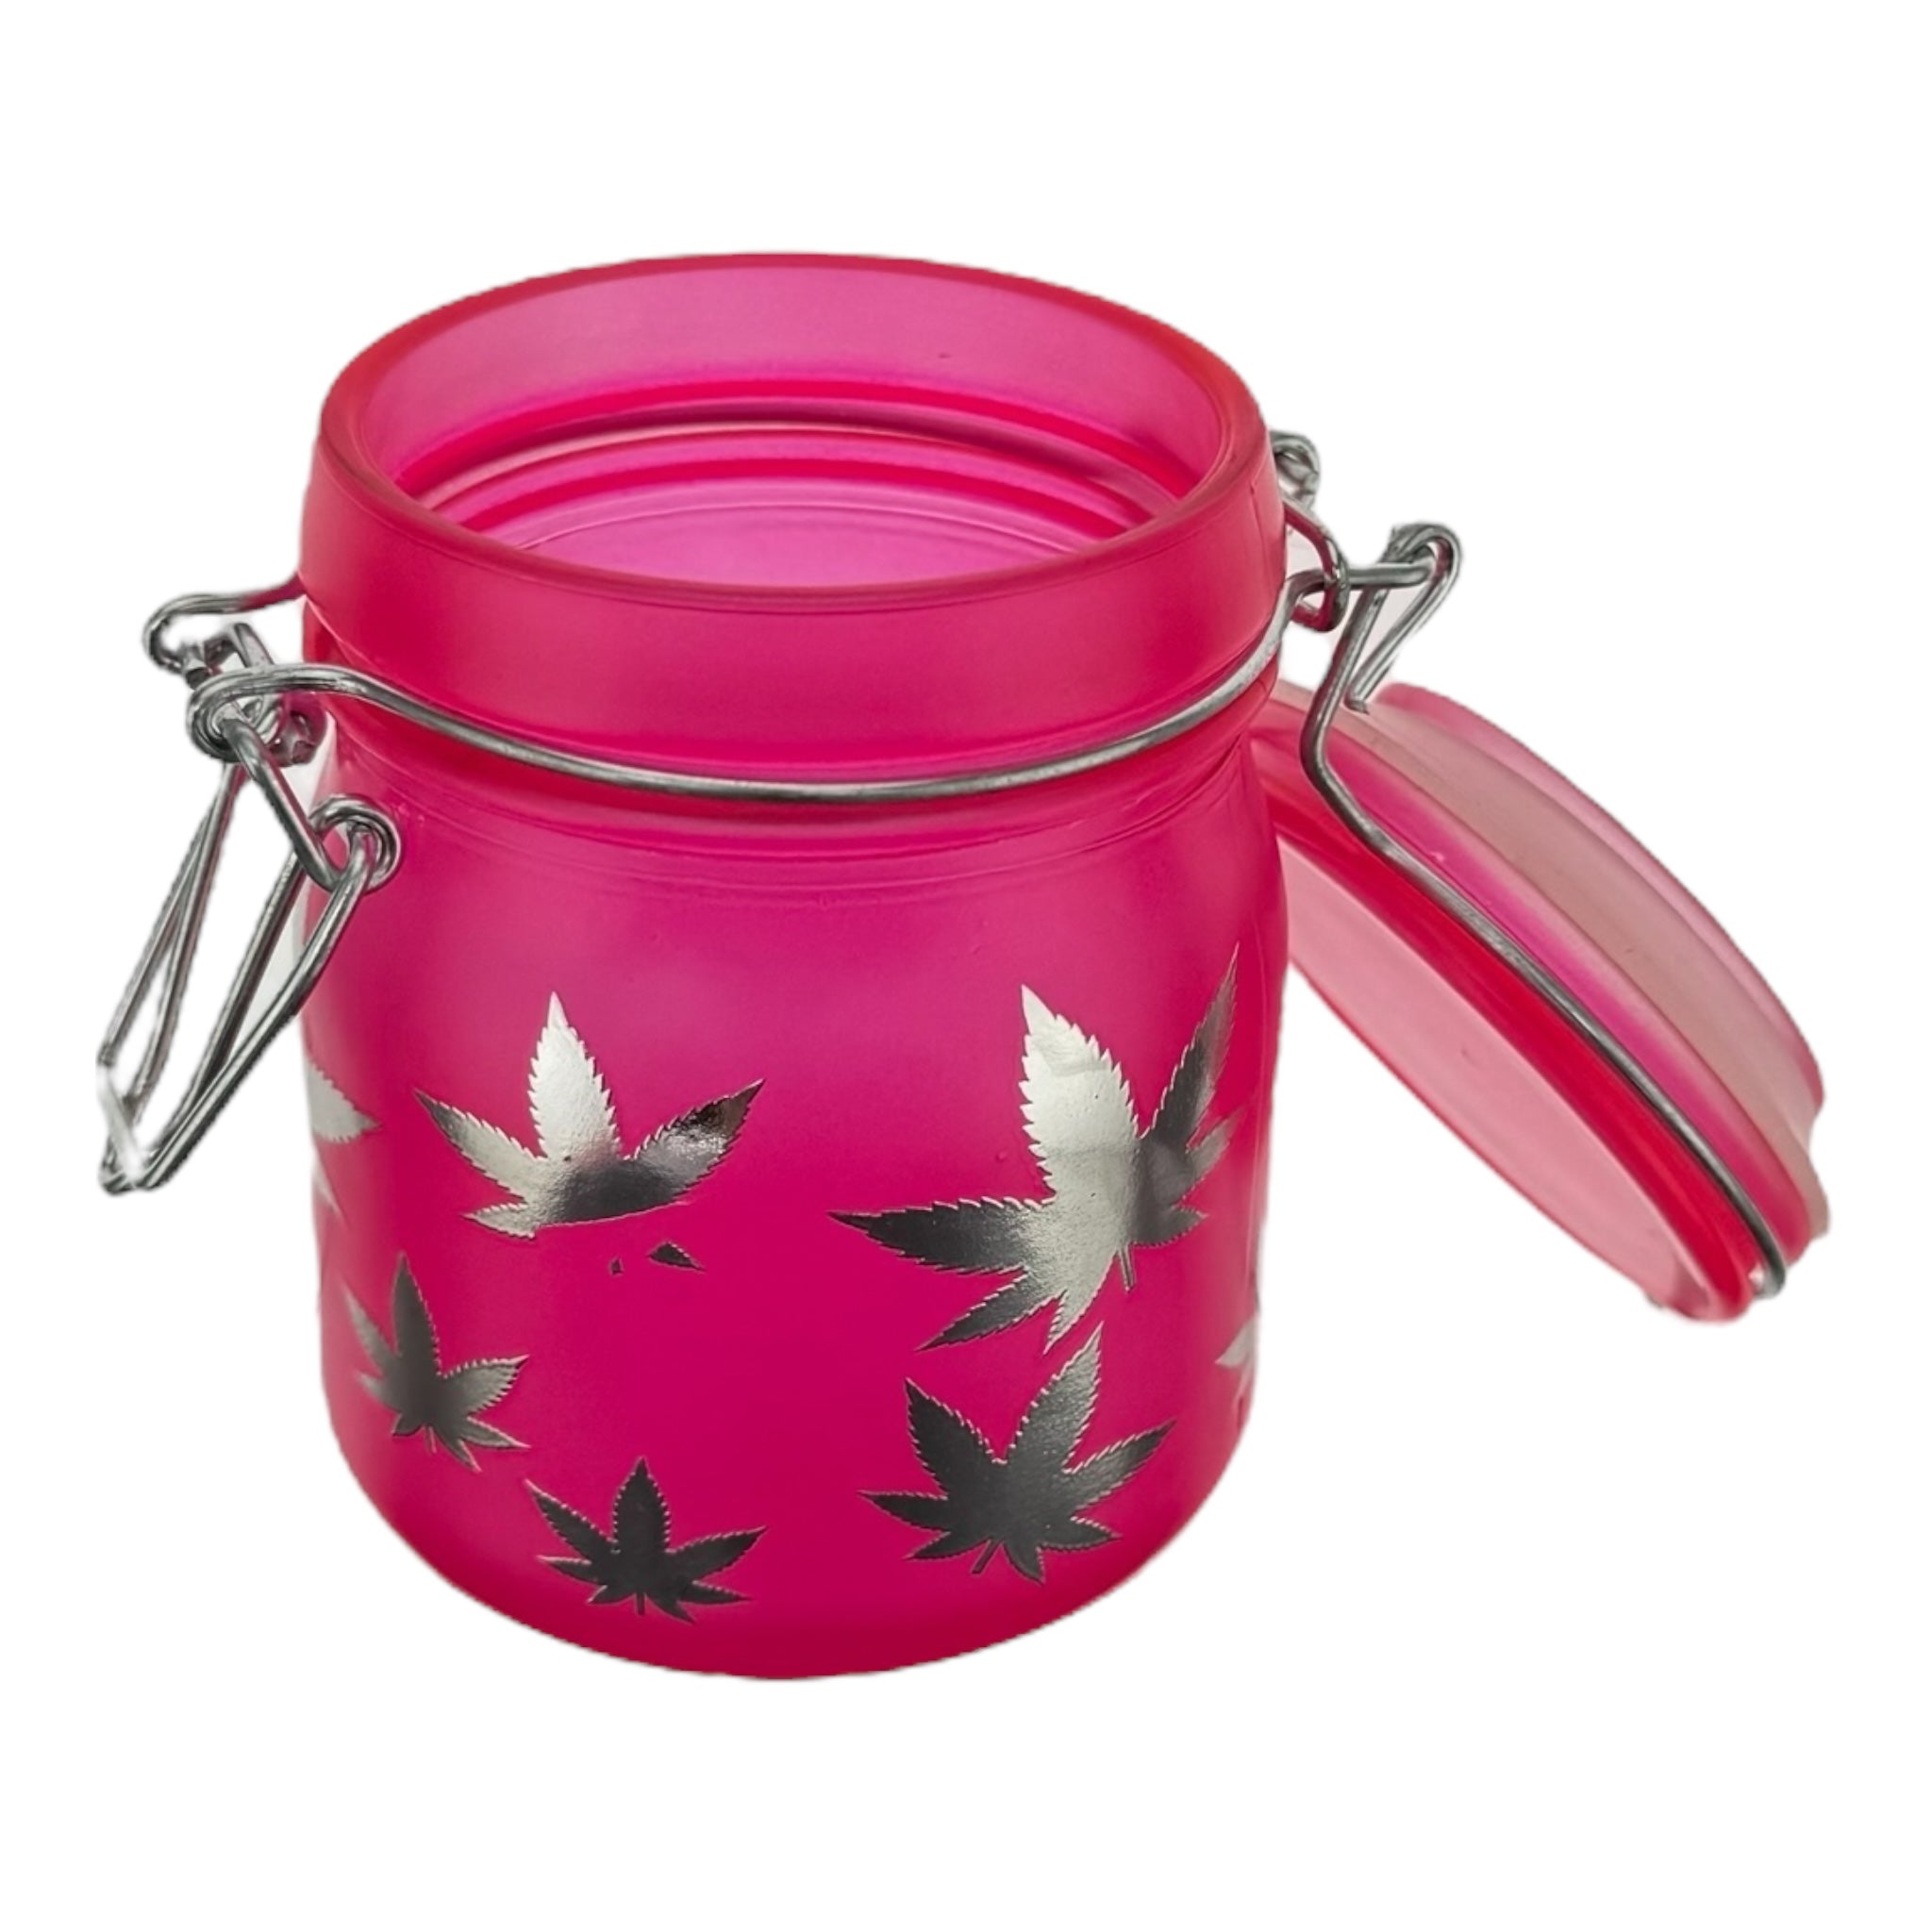 Pink Jar With Weed Leaves Small